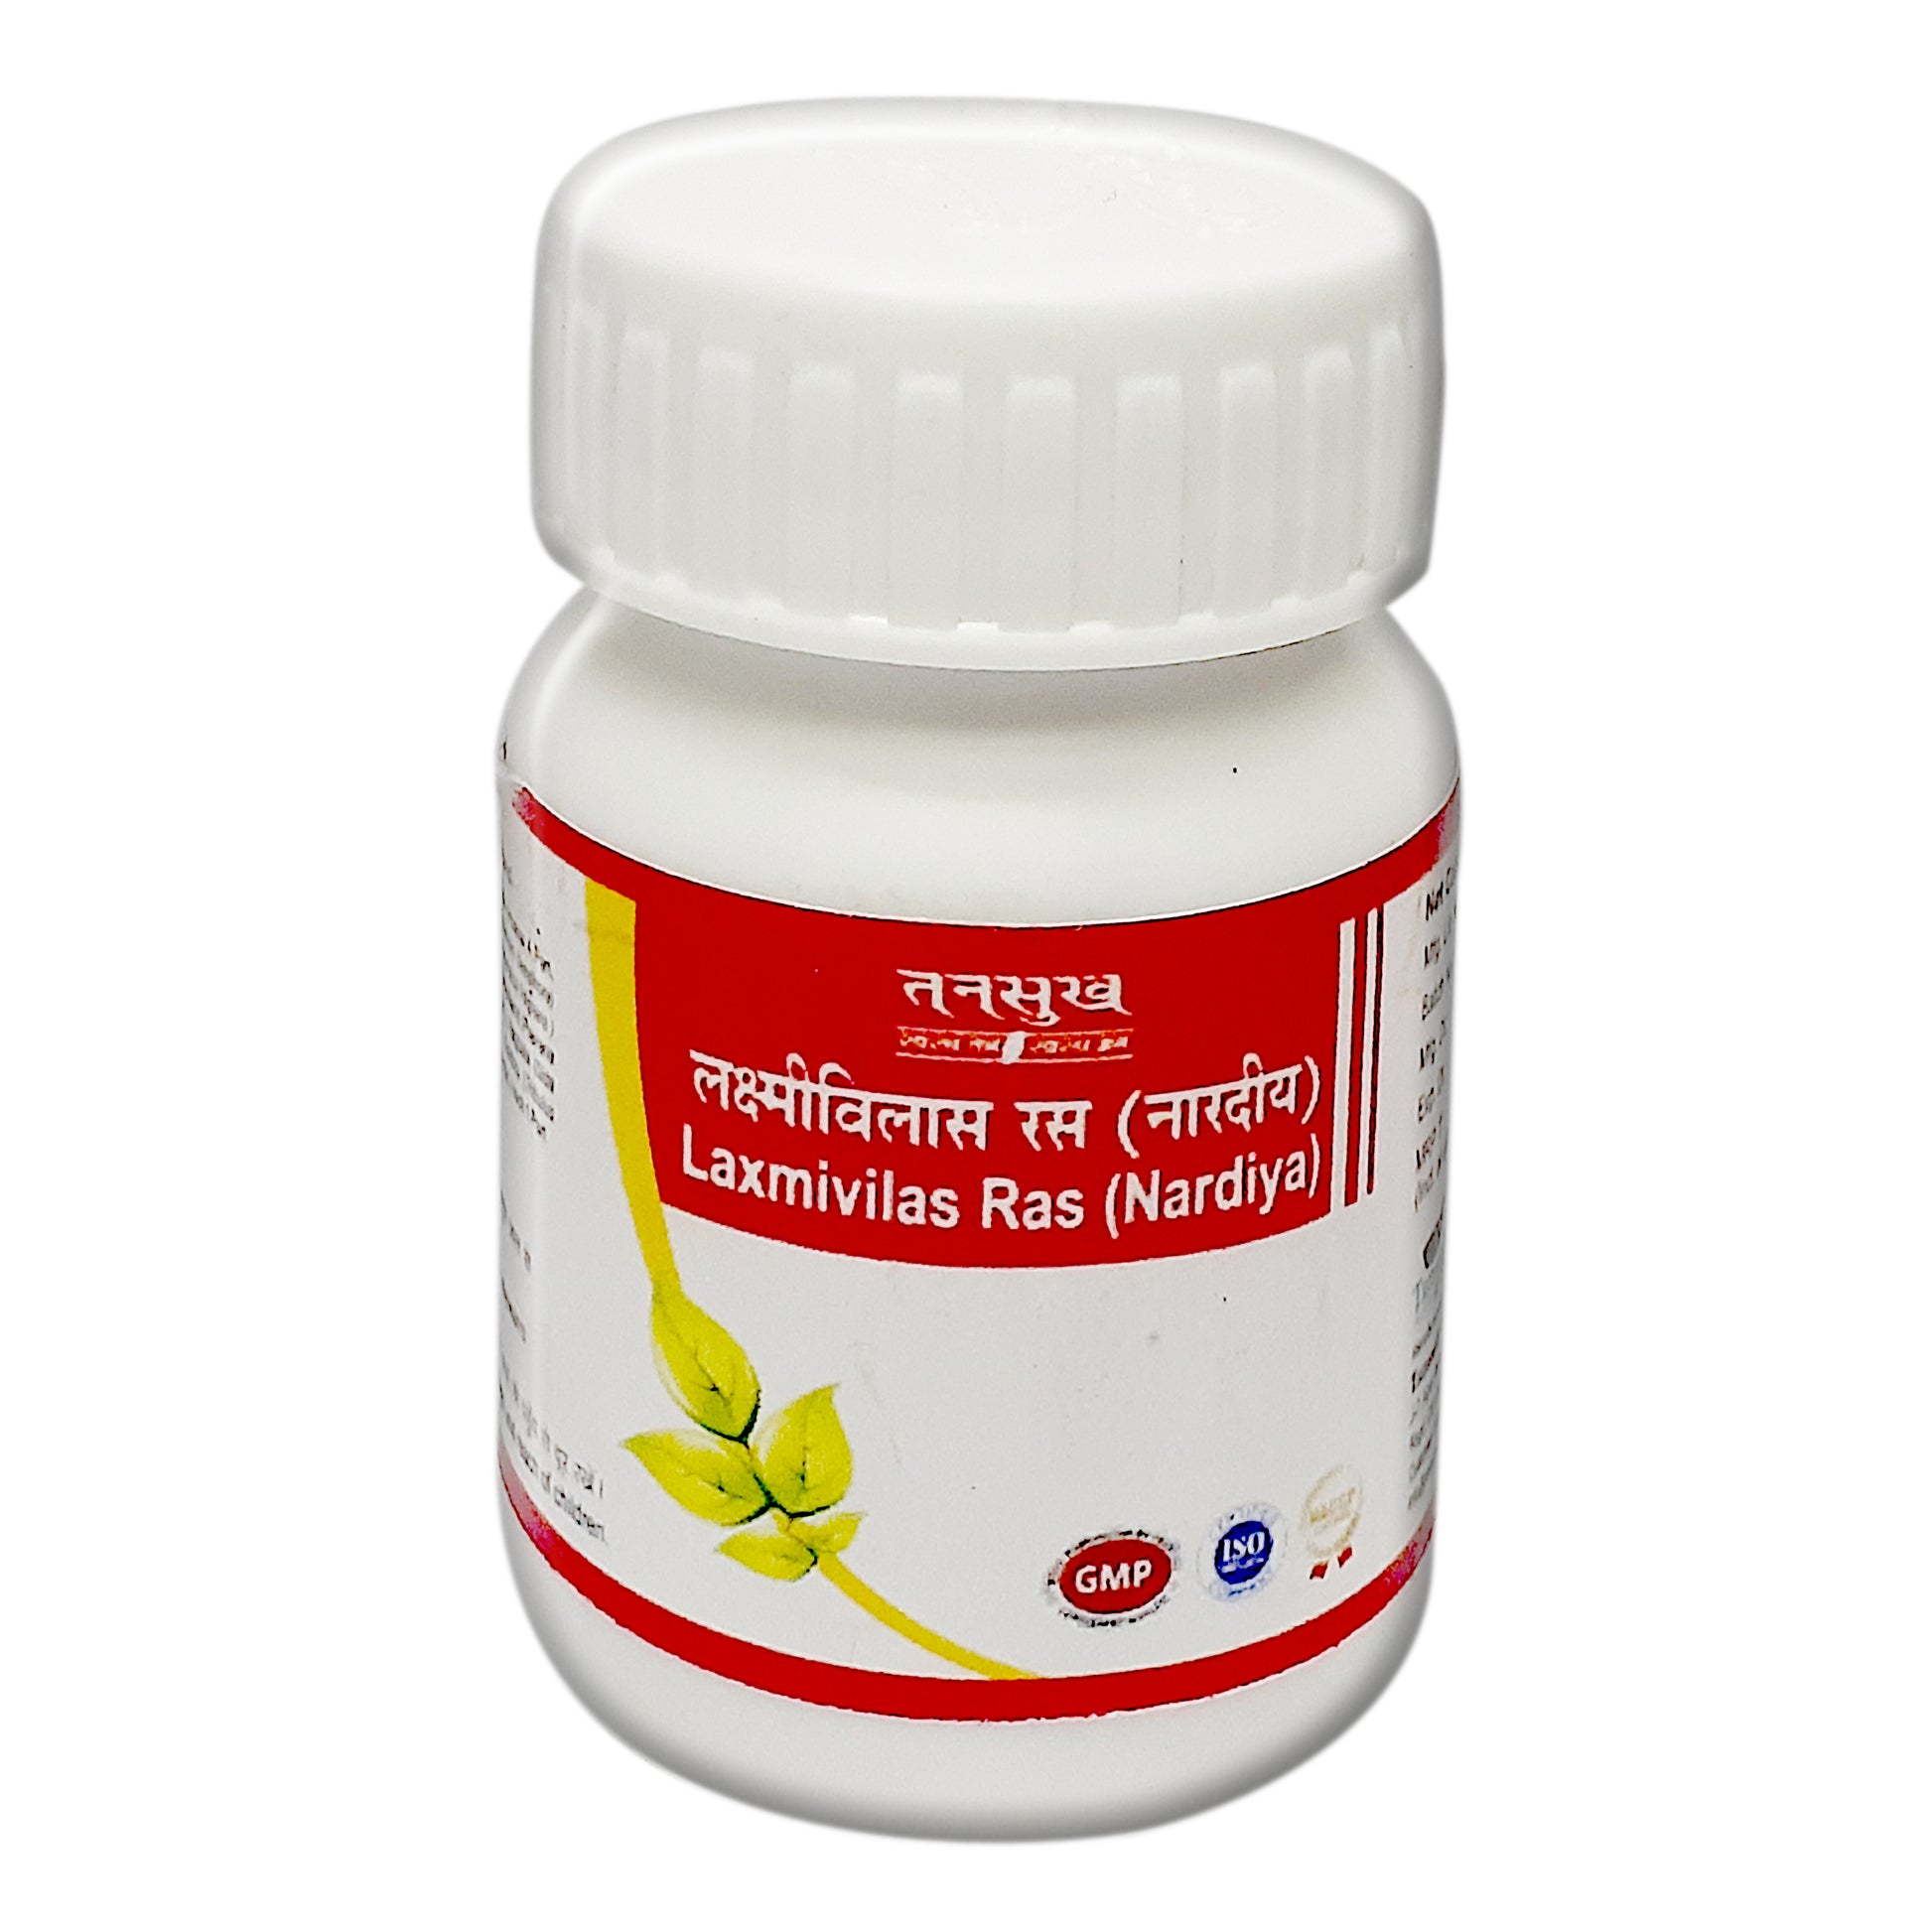 laxmivilas ras tablets ayurvedic medicine for cough and cold